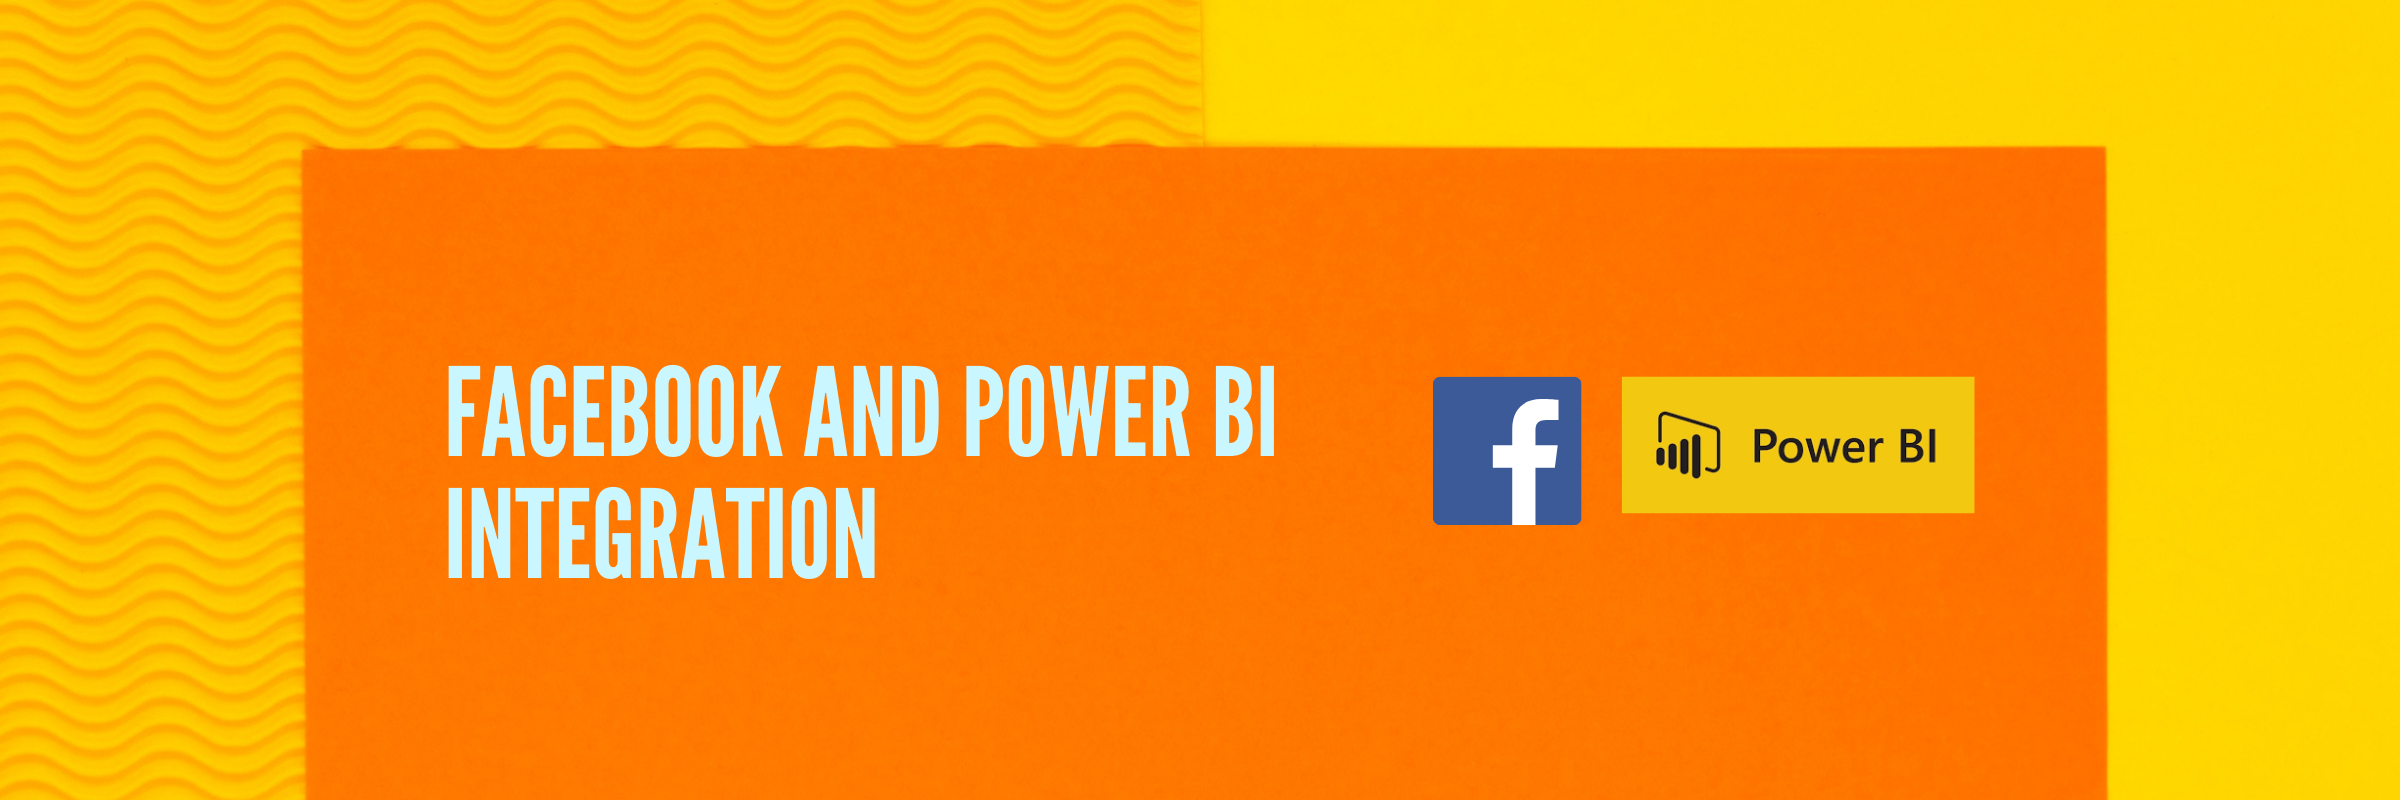 How To Connect Facebook Ads To Power BI in 5 Simple Steps?